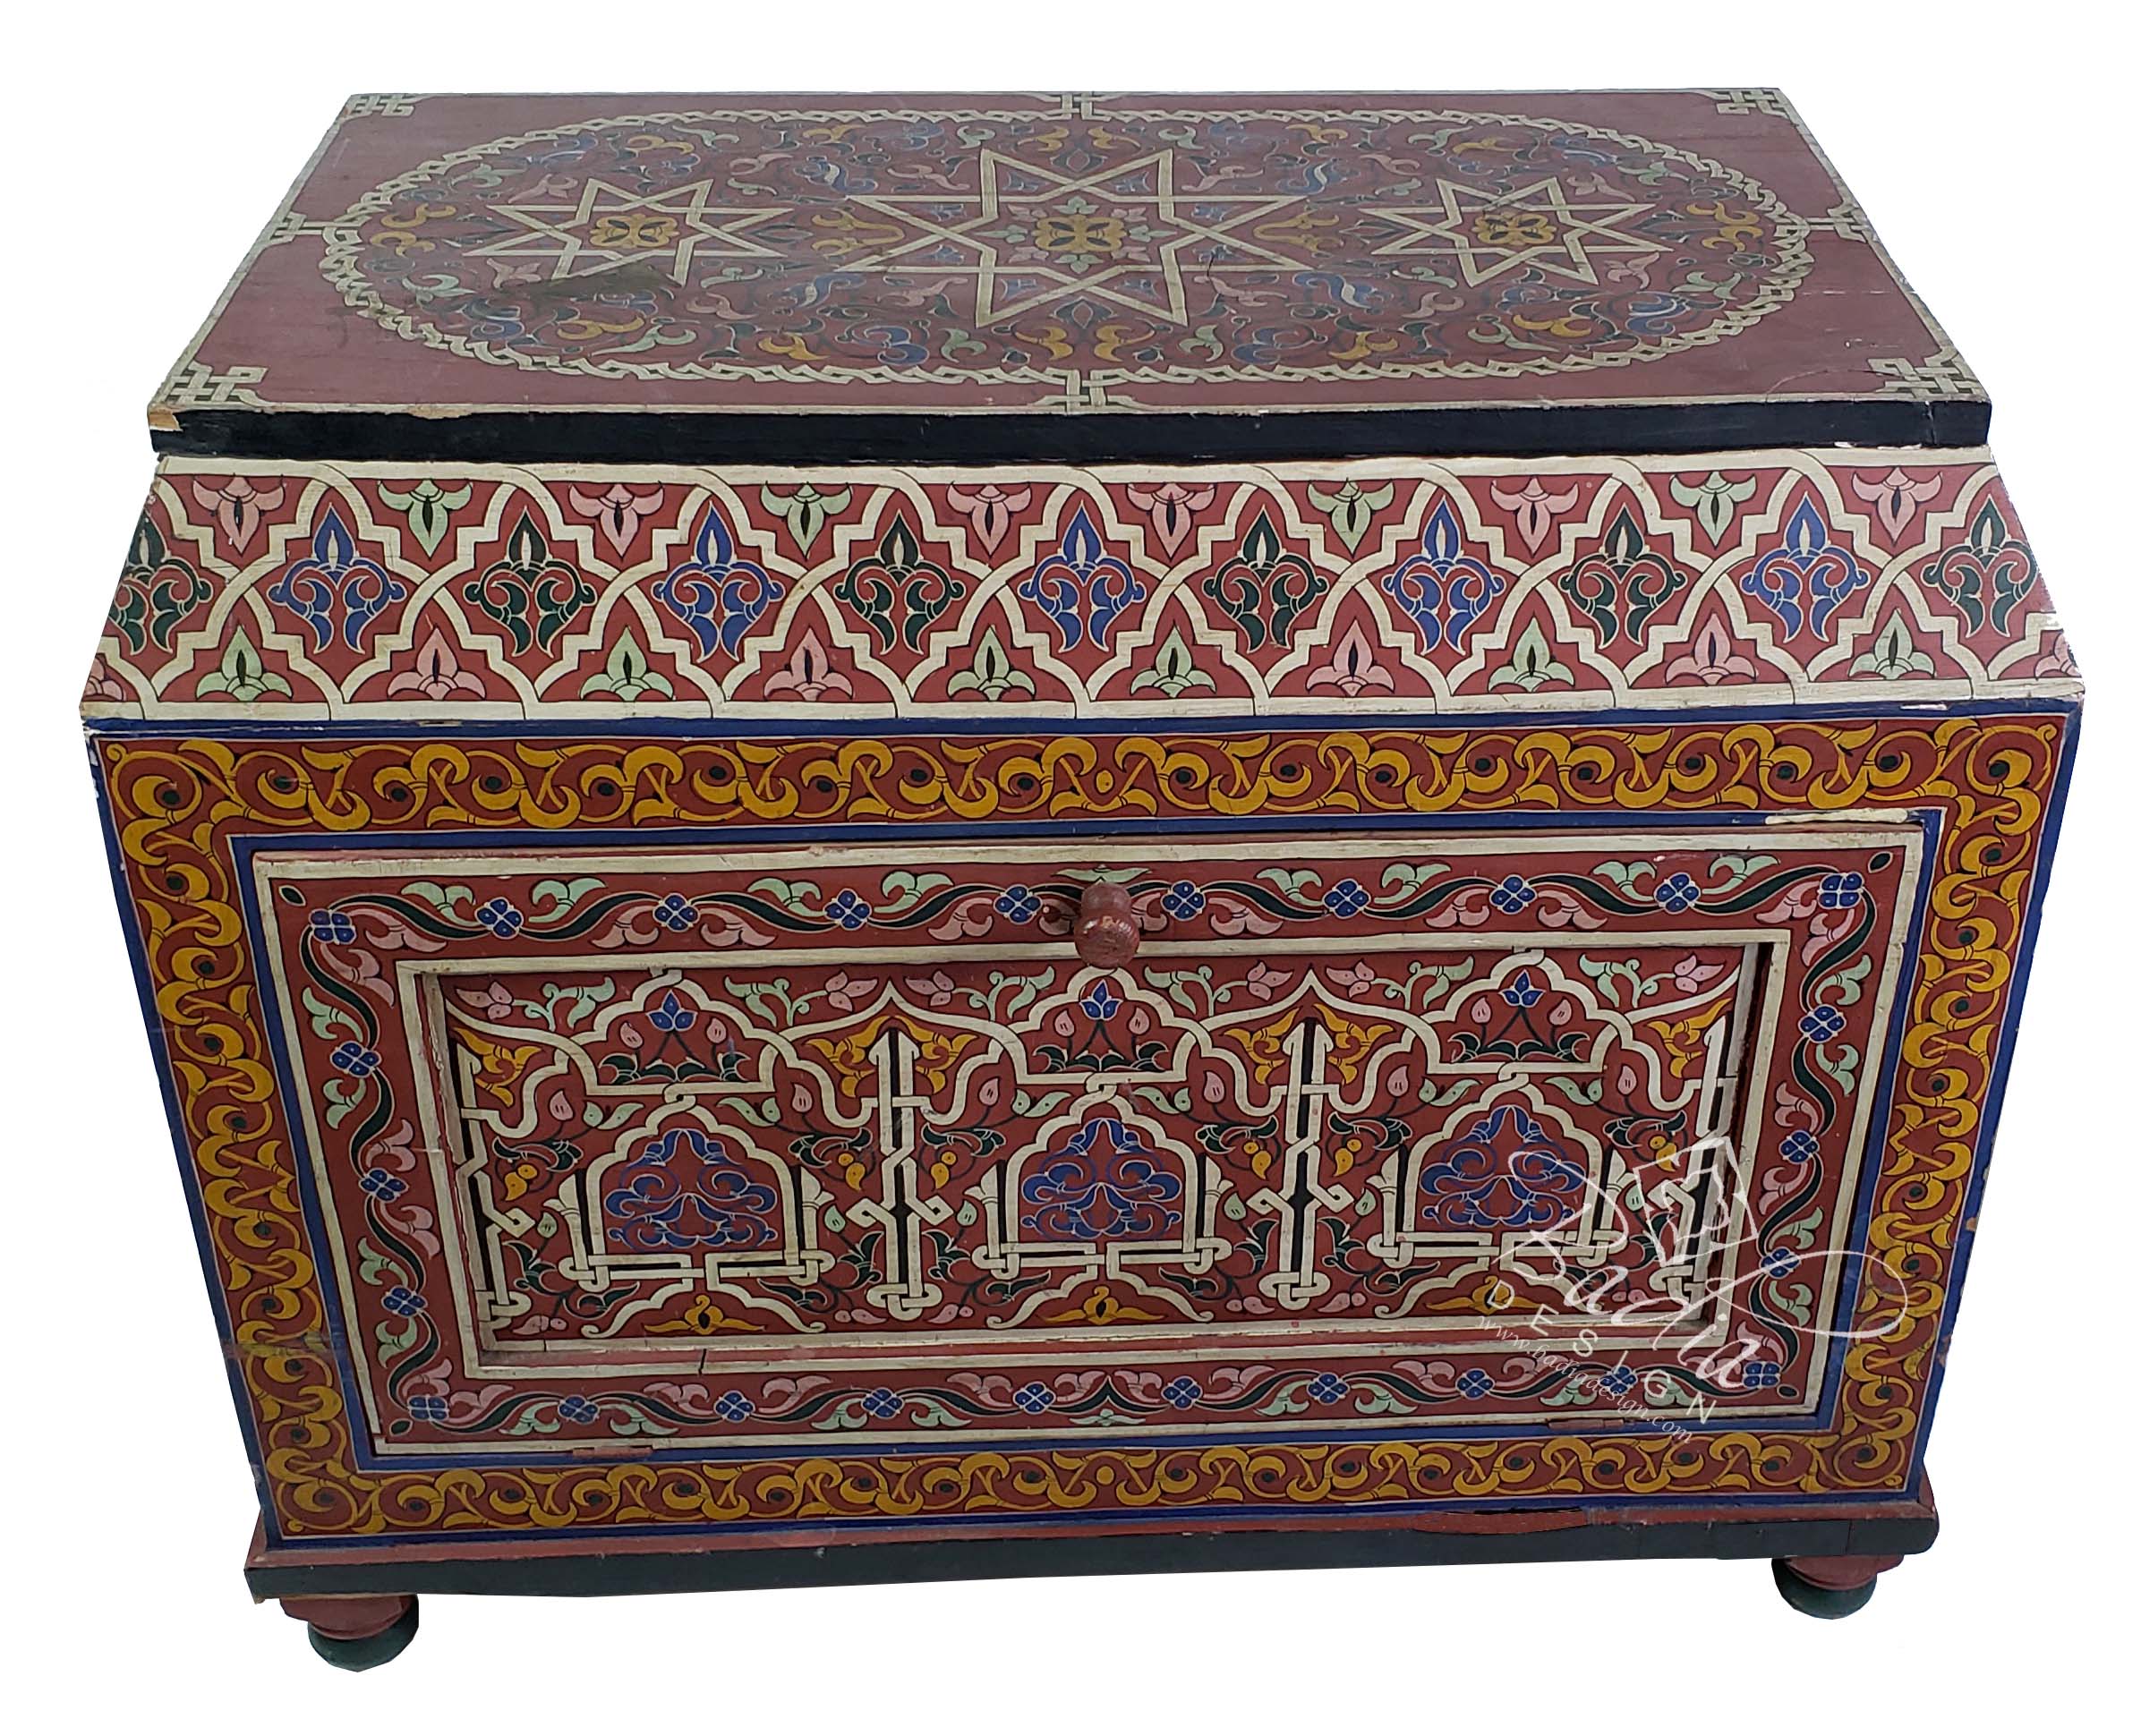 red-moroccan-vintage-hand-painted-wooden-trunk-hp-t004-1.jpg